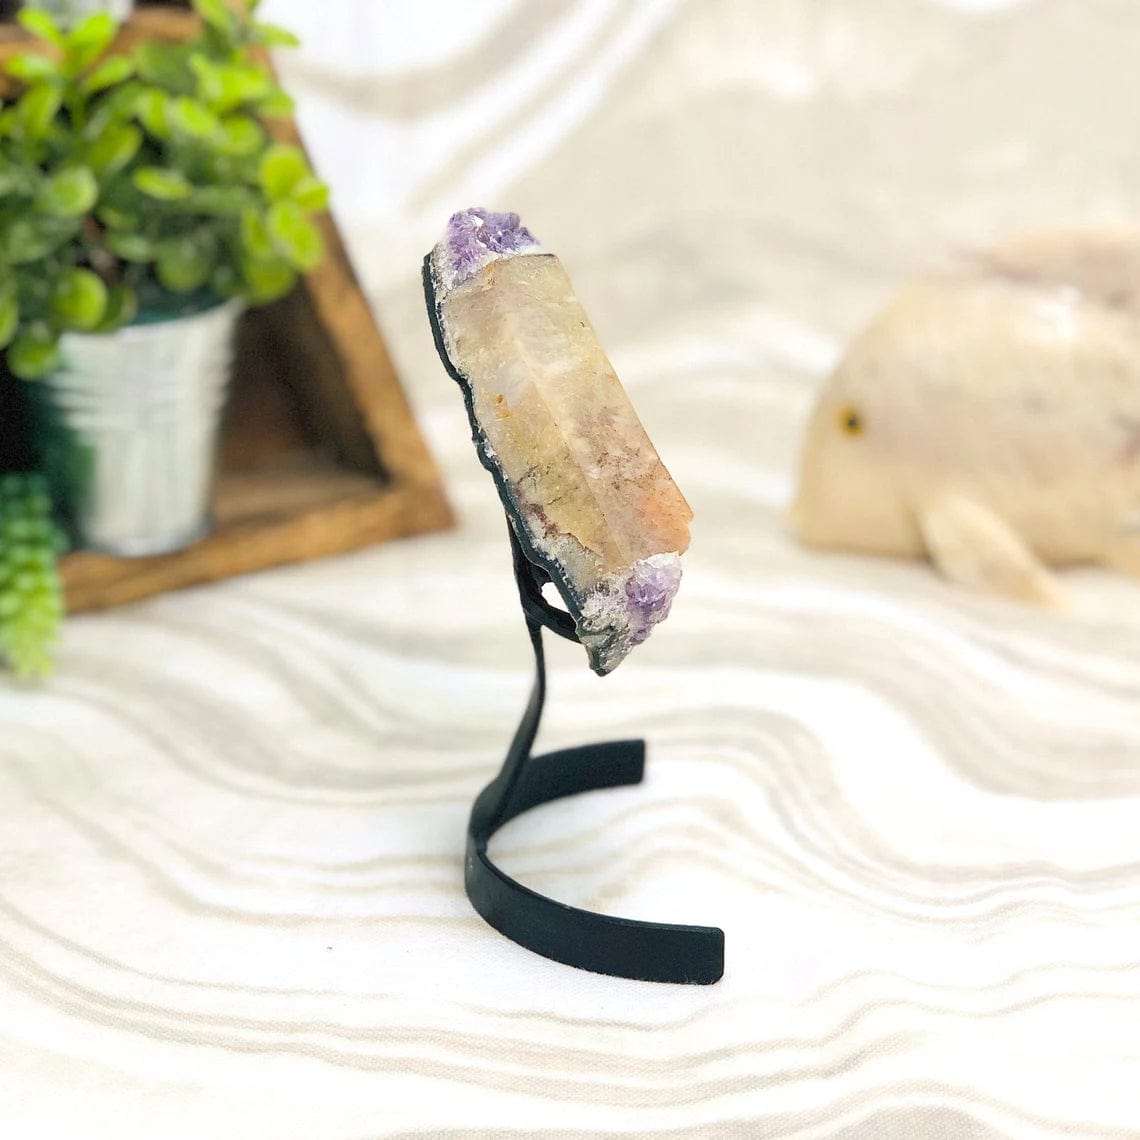 Amethyst Crystal Purple Geode With Calcite on Metal Stand from other side view